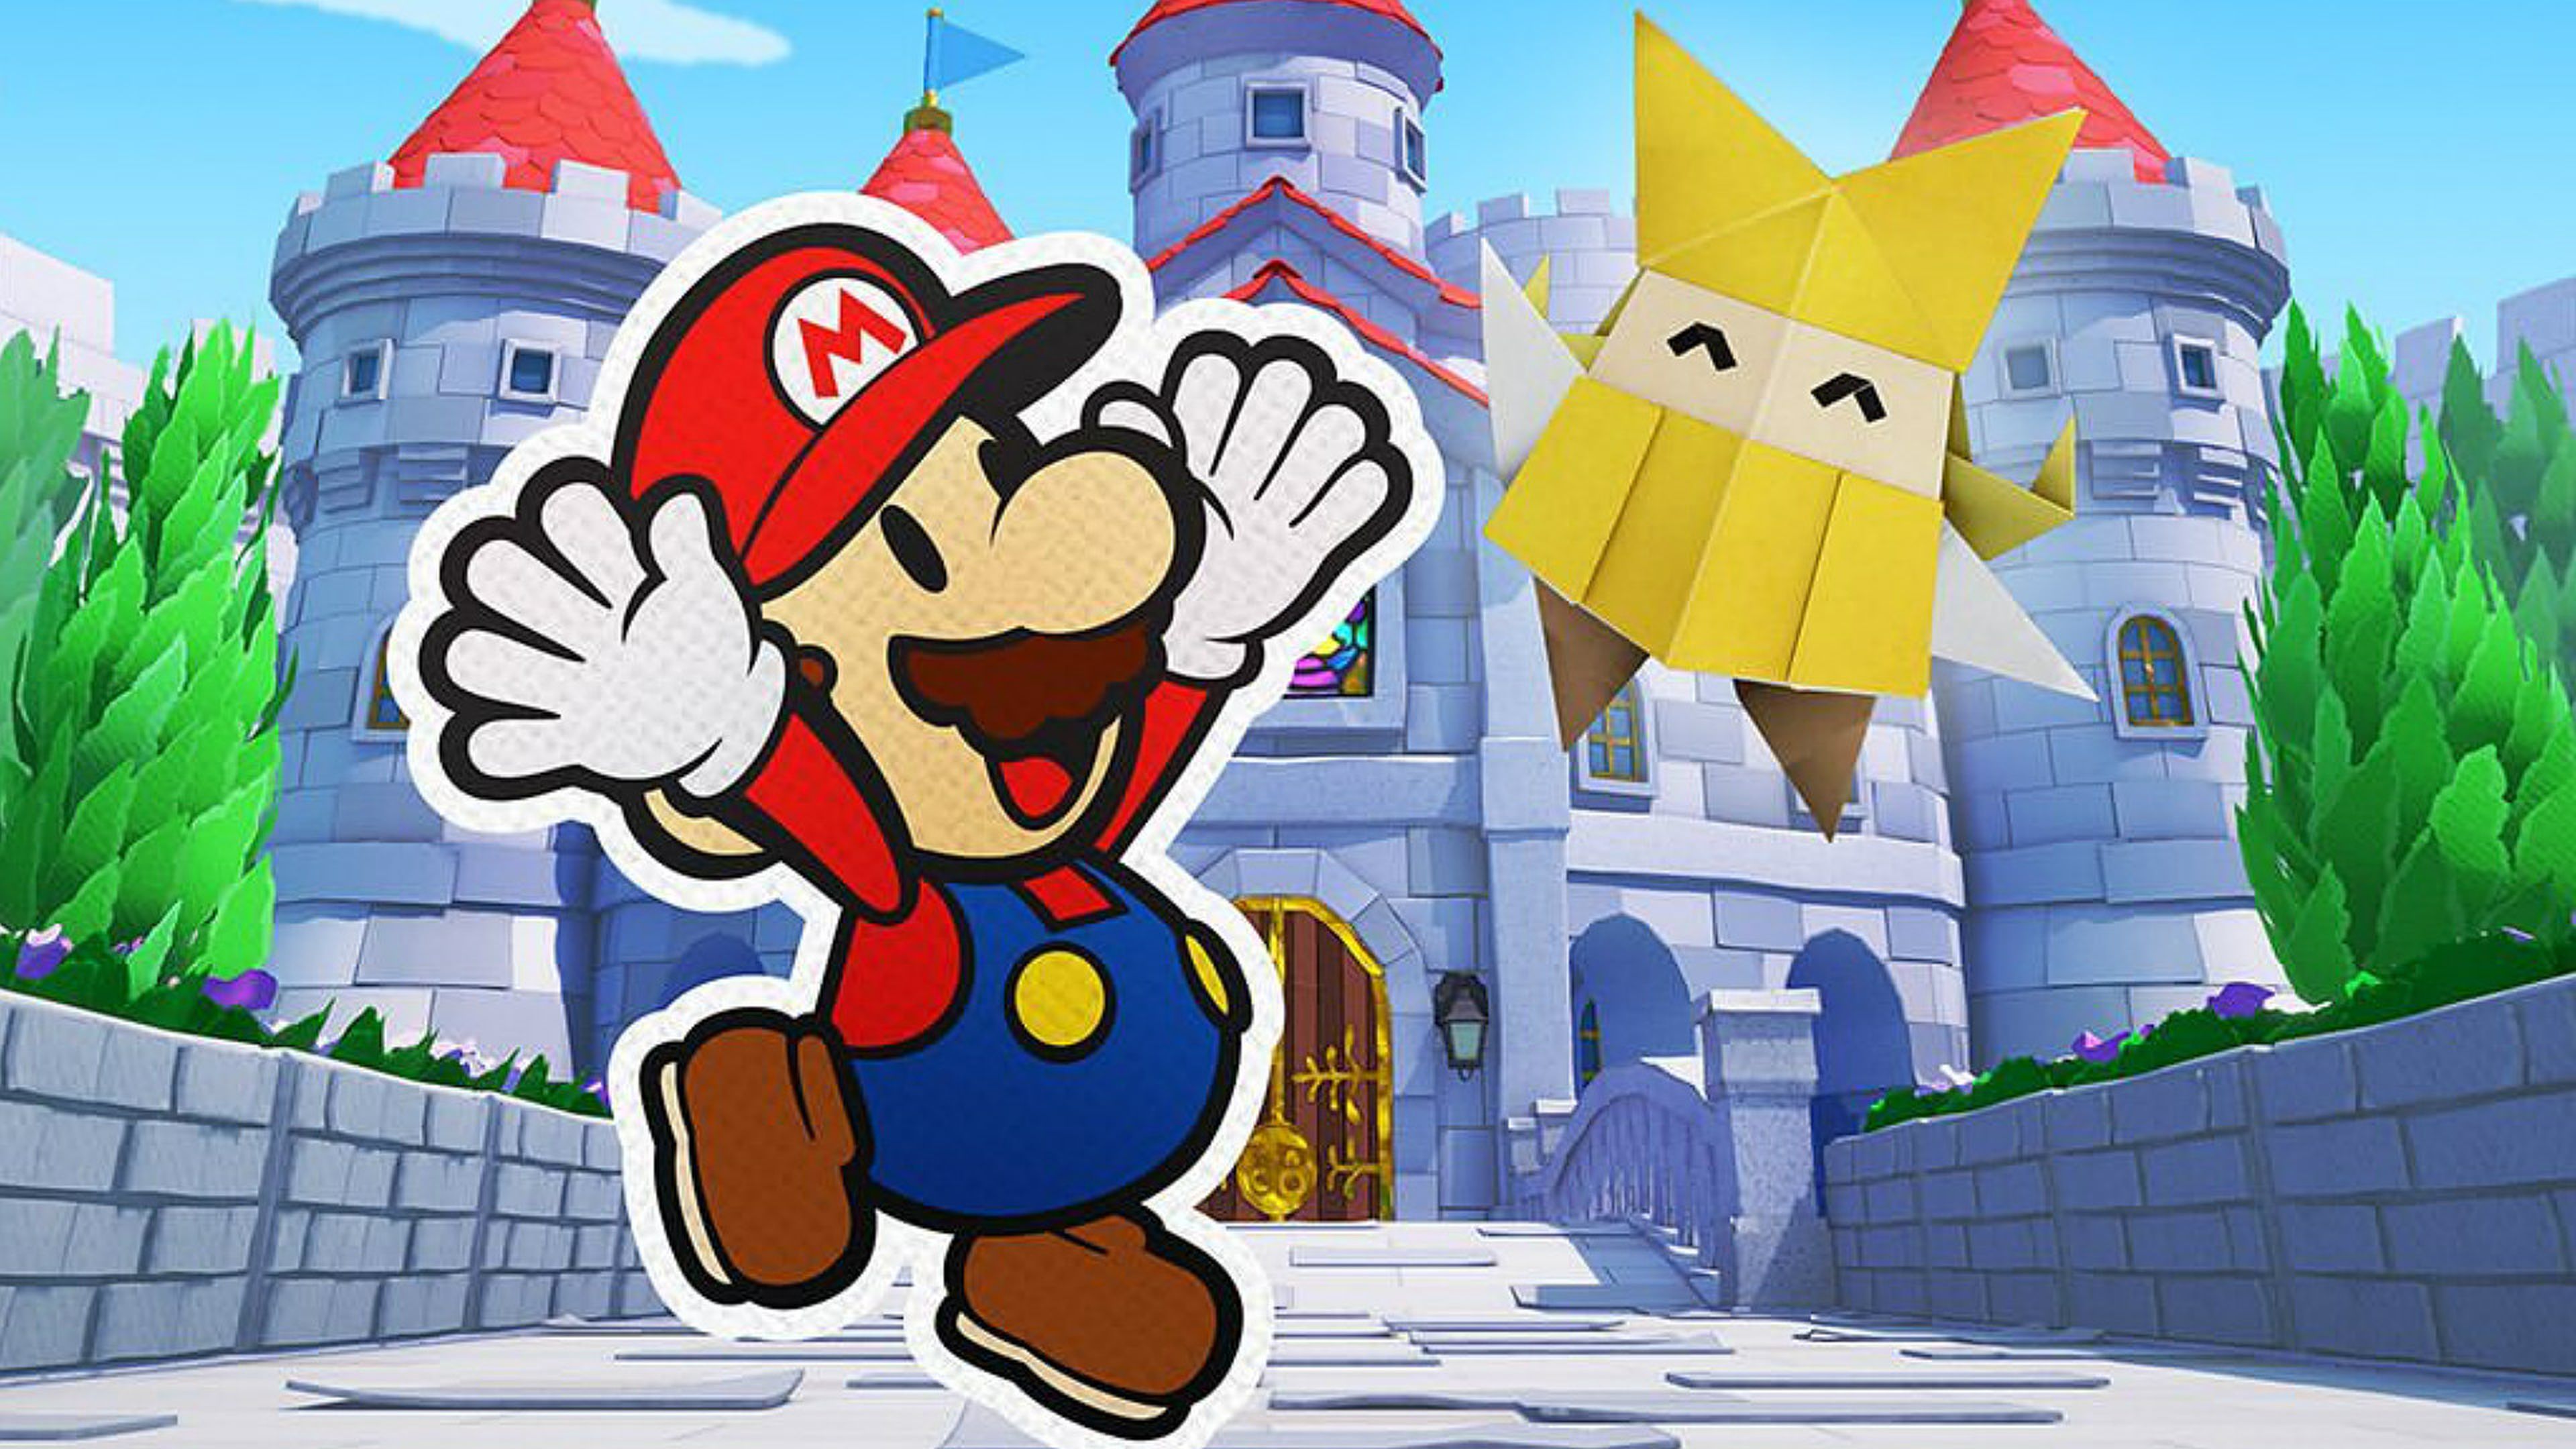 ✏️(ANÁLISIS) Paper Mario: The Origami King